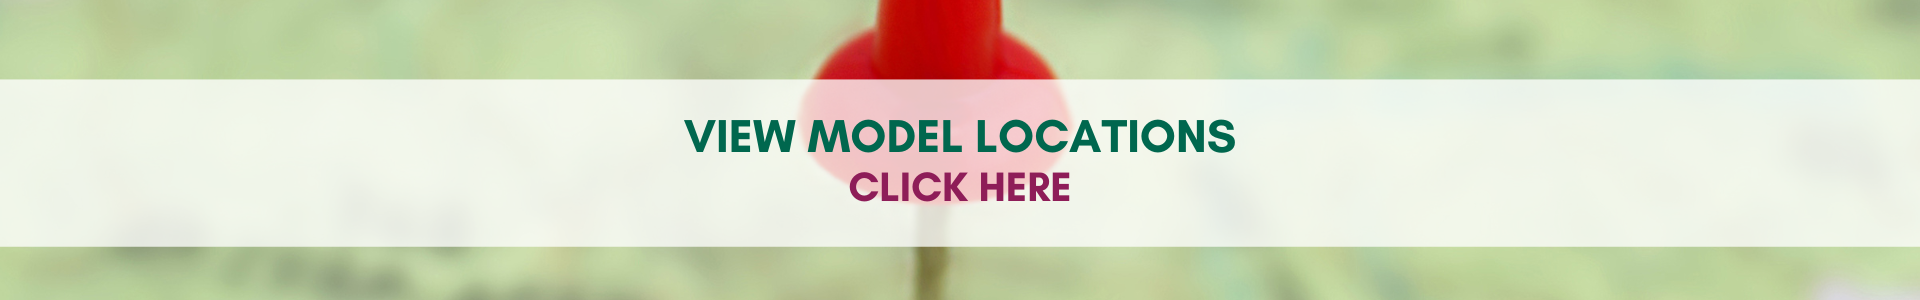 become a model - locations